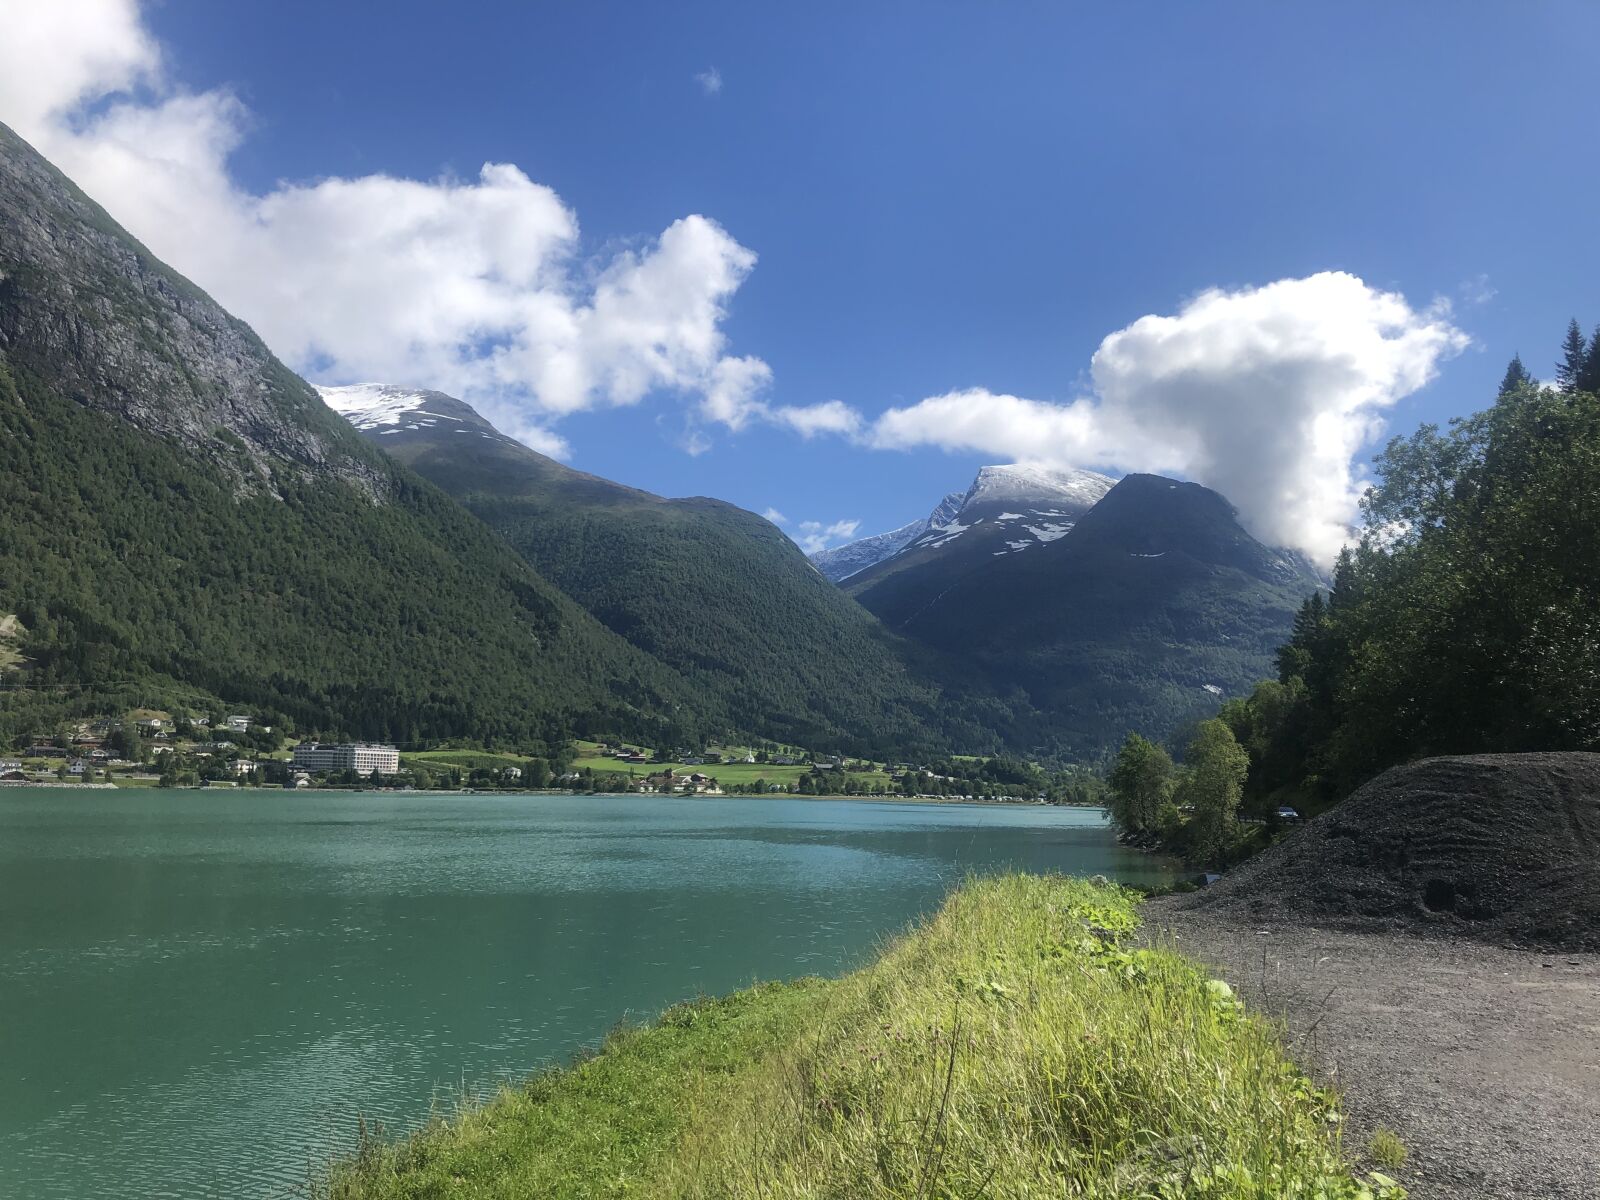 Apple iPhone X + iPhone X back dual camera 4mm f/1.8 sample photo. Stryn, norway, green river photography